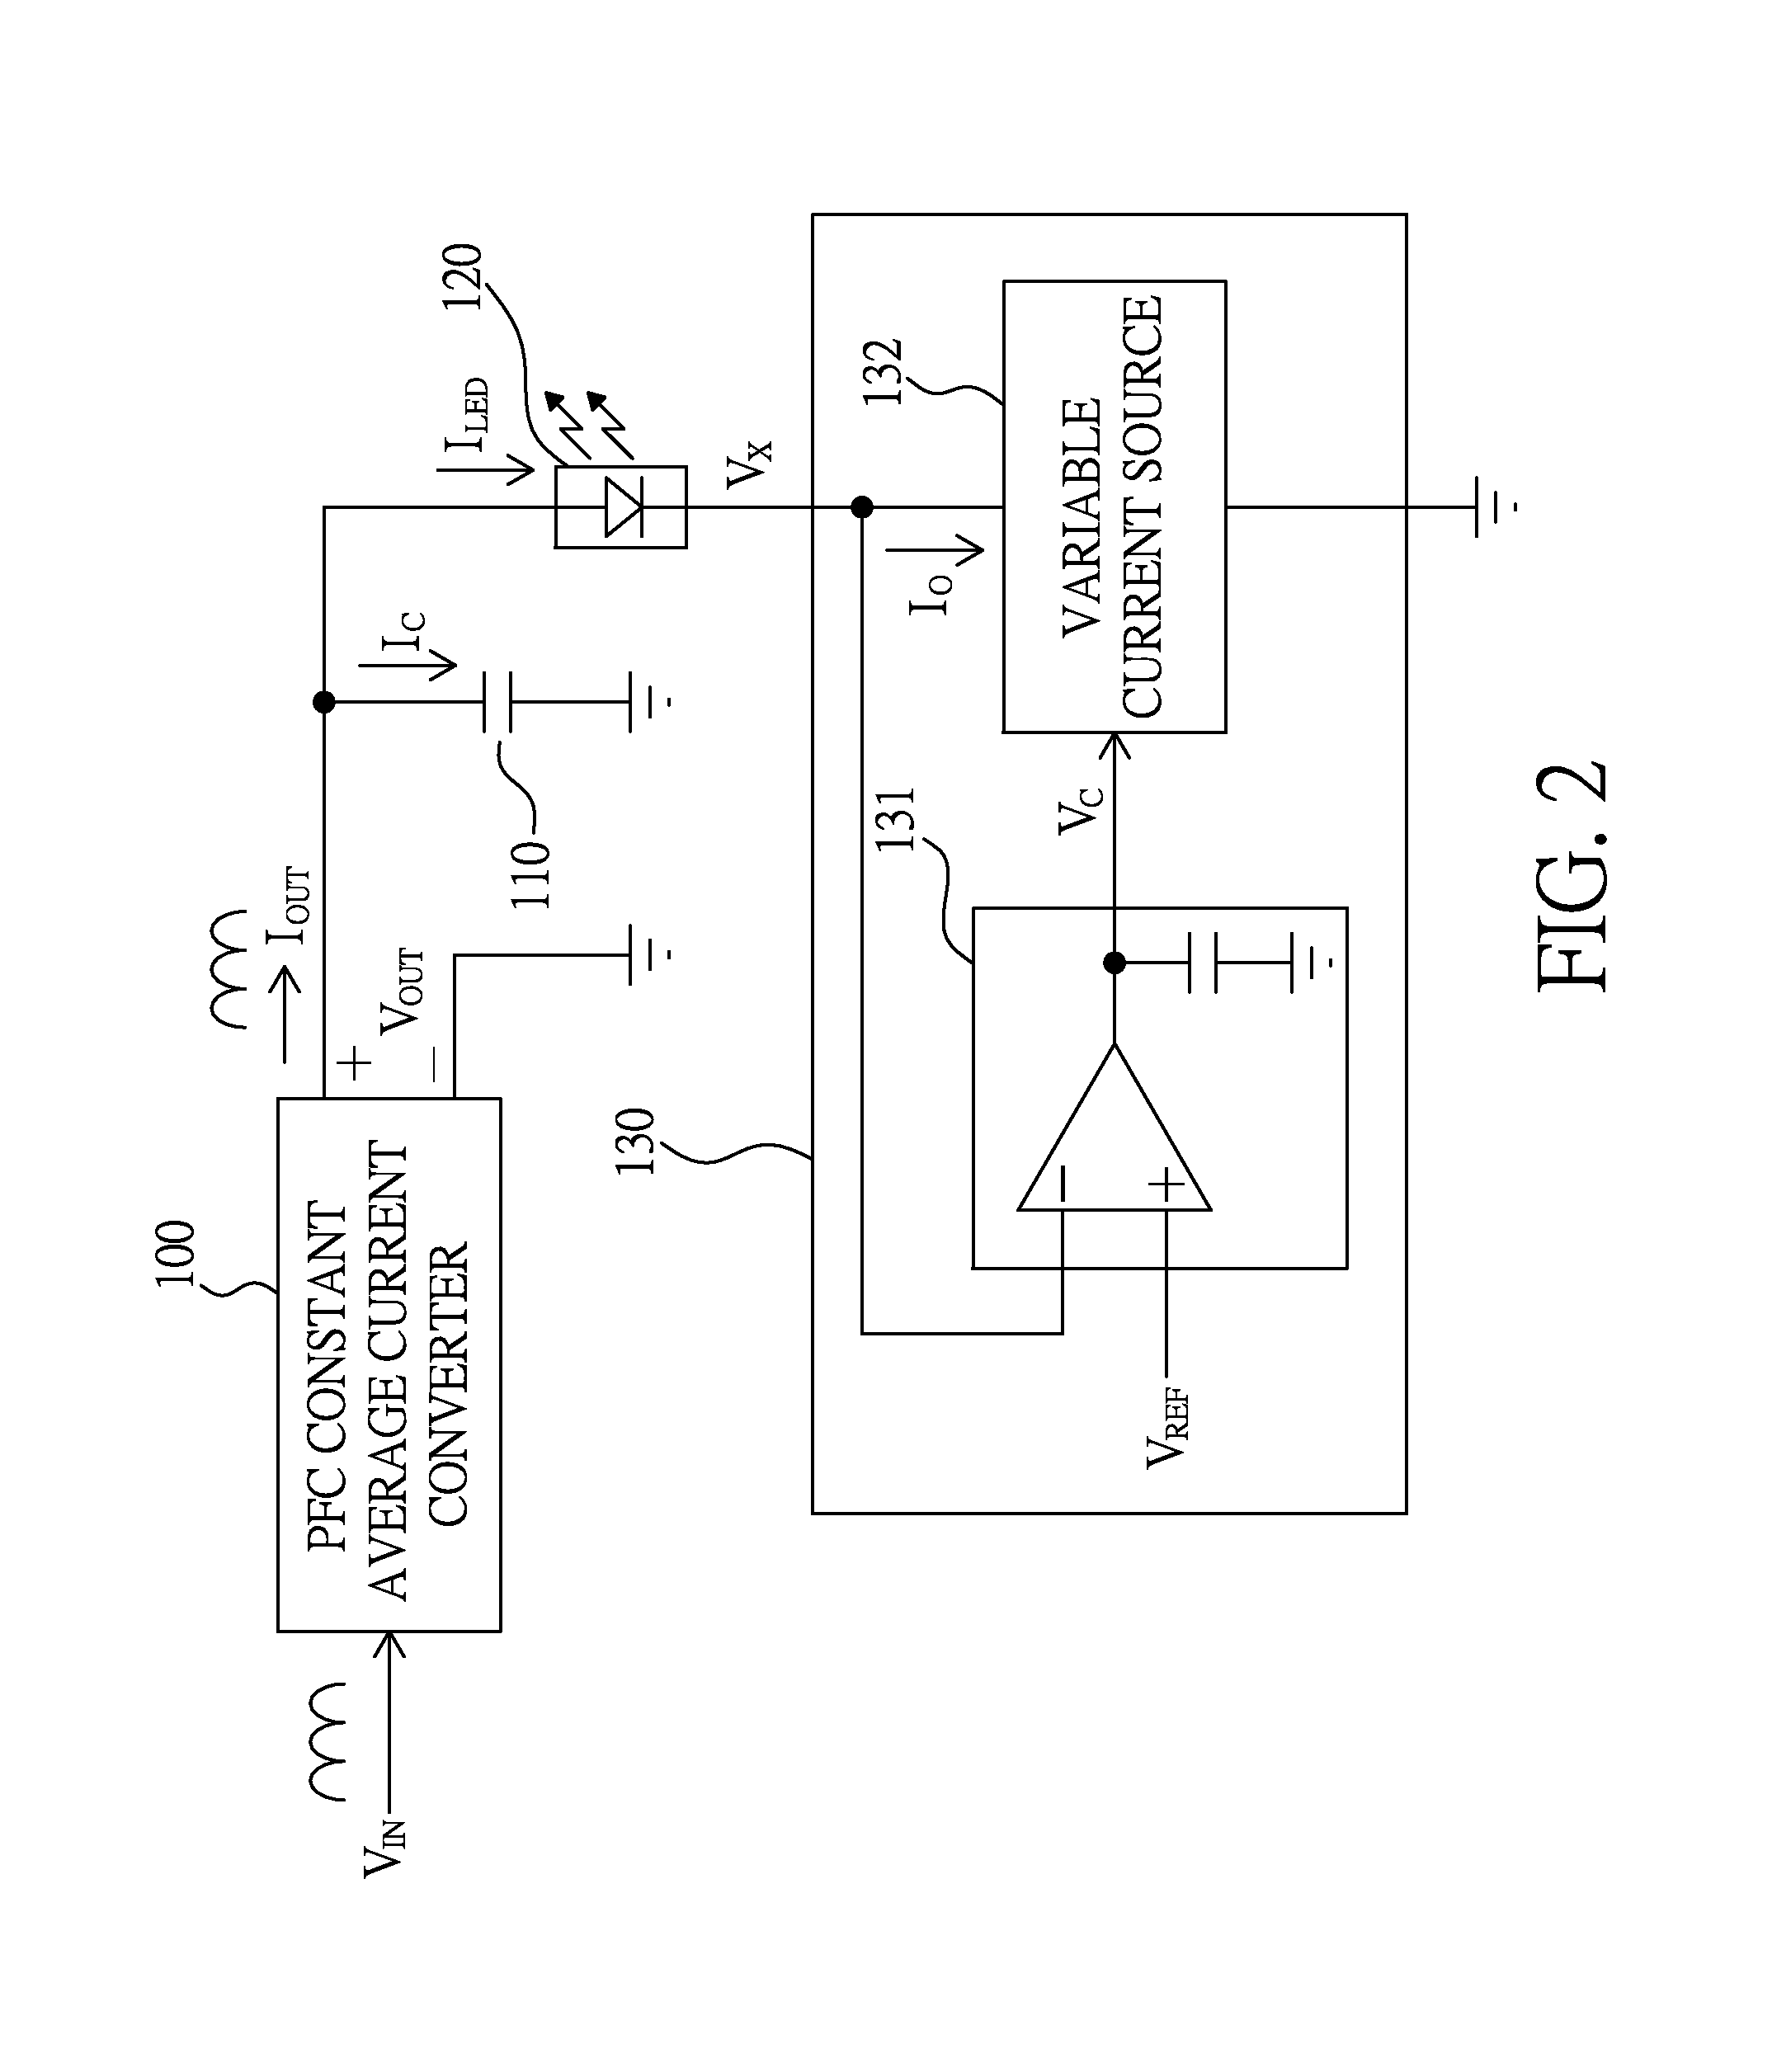 Method for minimizing LED flicker of an LED driver system